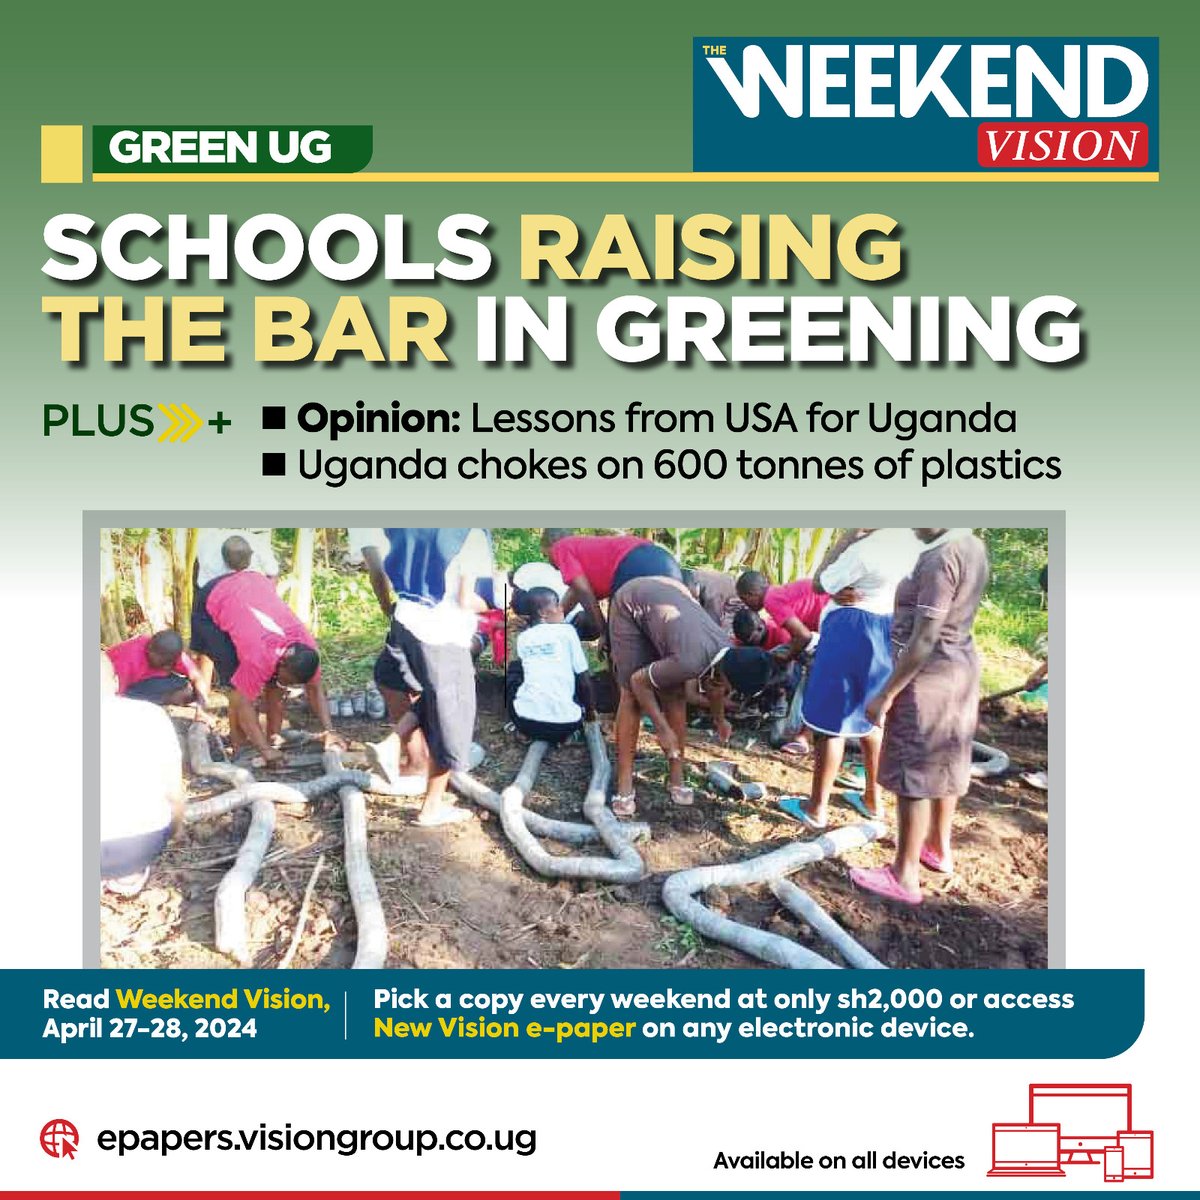 #GreenUg in #WeekendVision📌 
👉 How schools are making significant strides in environmental conservation
Dive into the details in the Weekend Vision!

Get a copy from your nearest vendor or subscribe to our #EPAPER👉🏿bit.ly/3d3acBF

#VisionUpdates